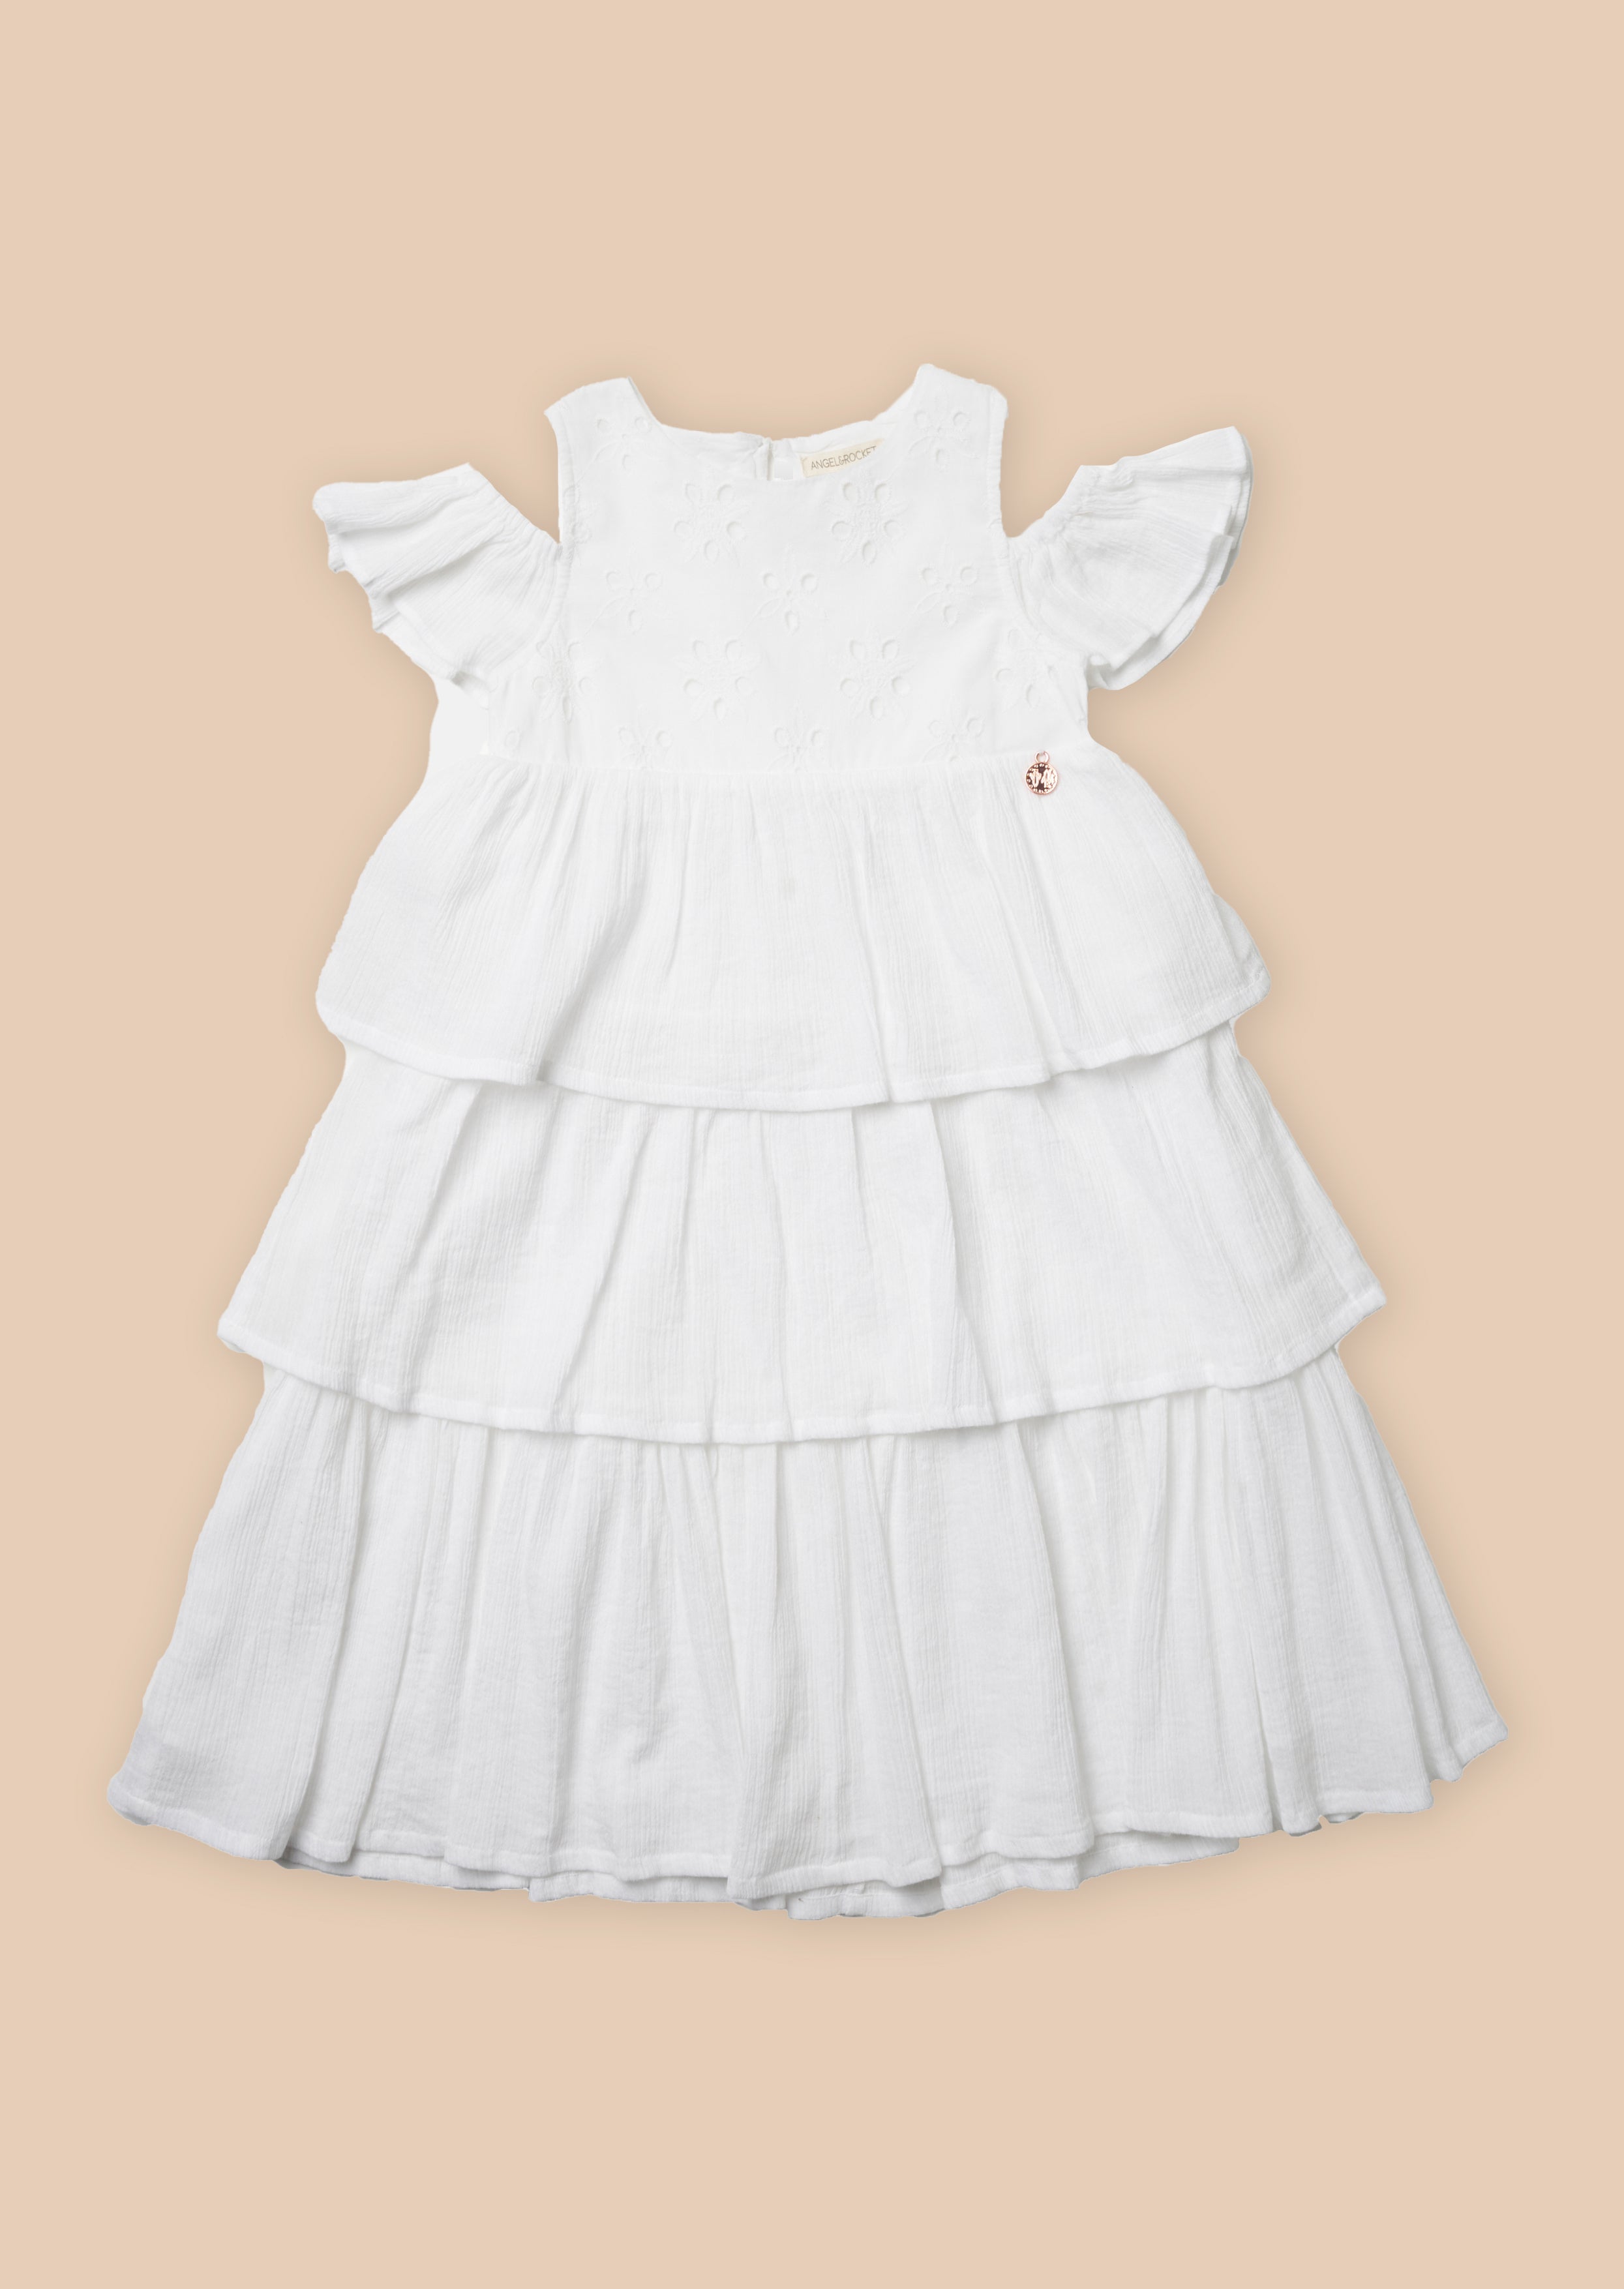 Girls Floral Embroidered White Dress